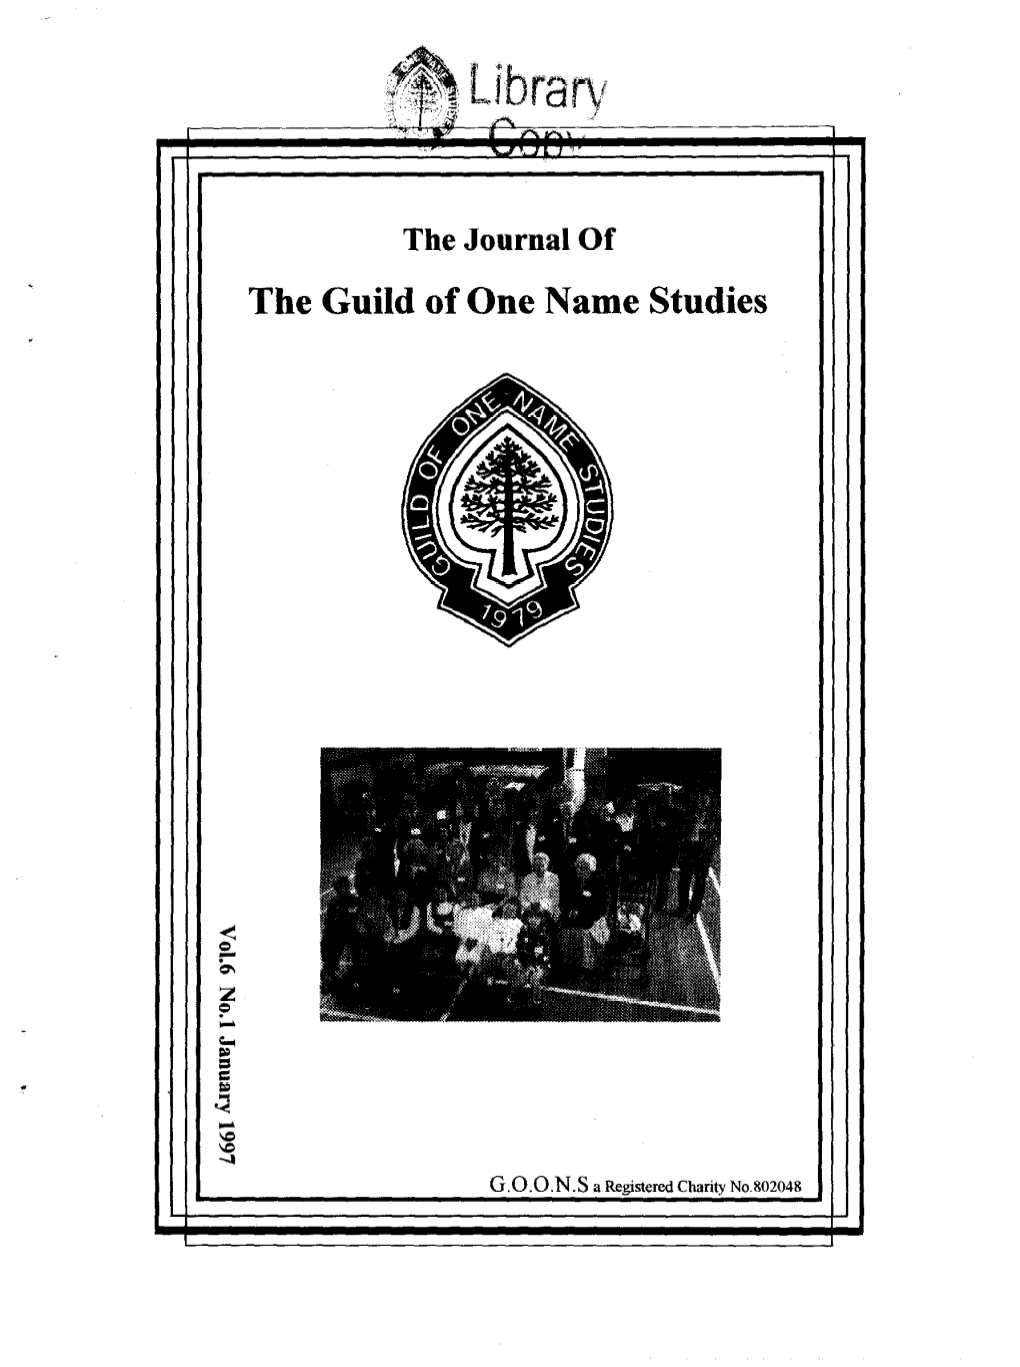 The Guild of One Name Studies